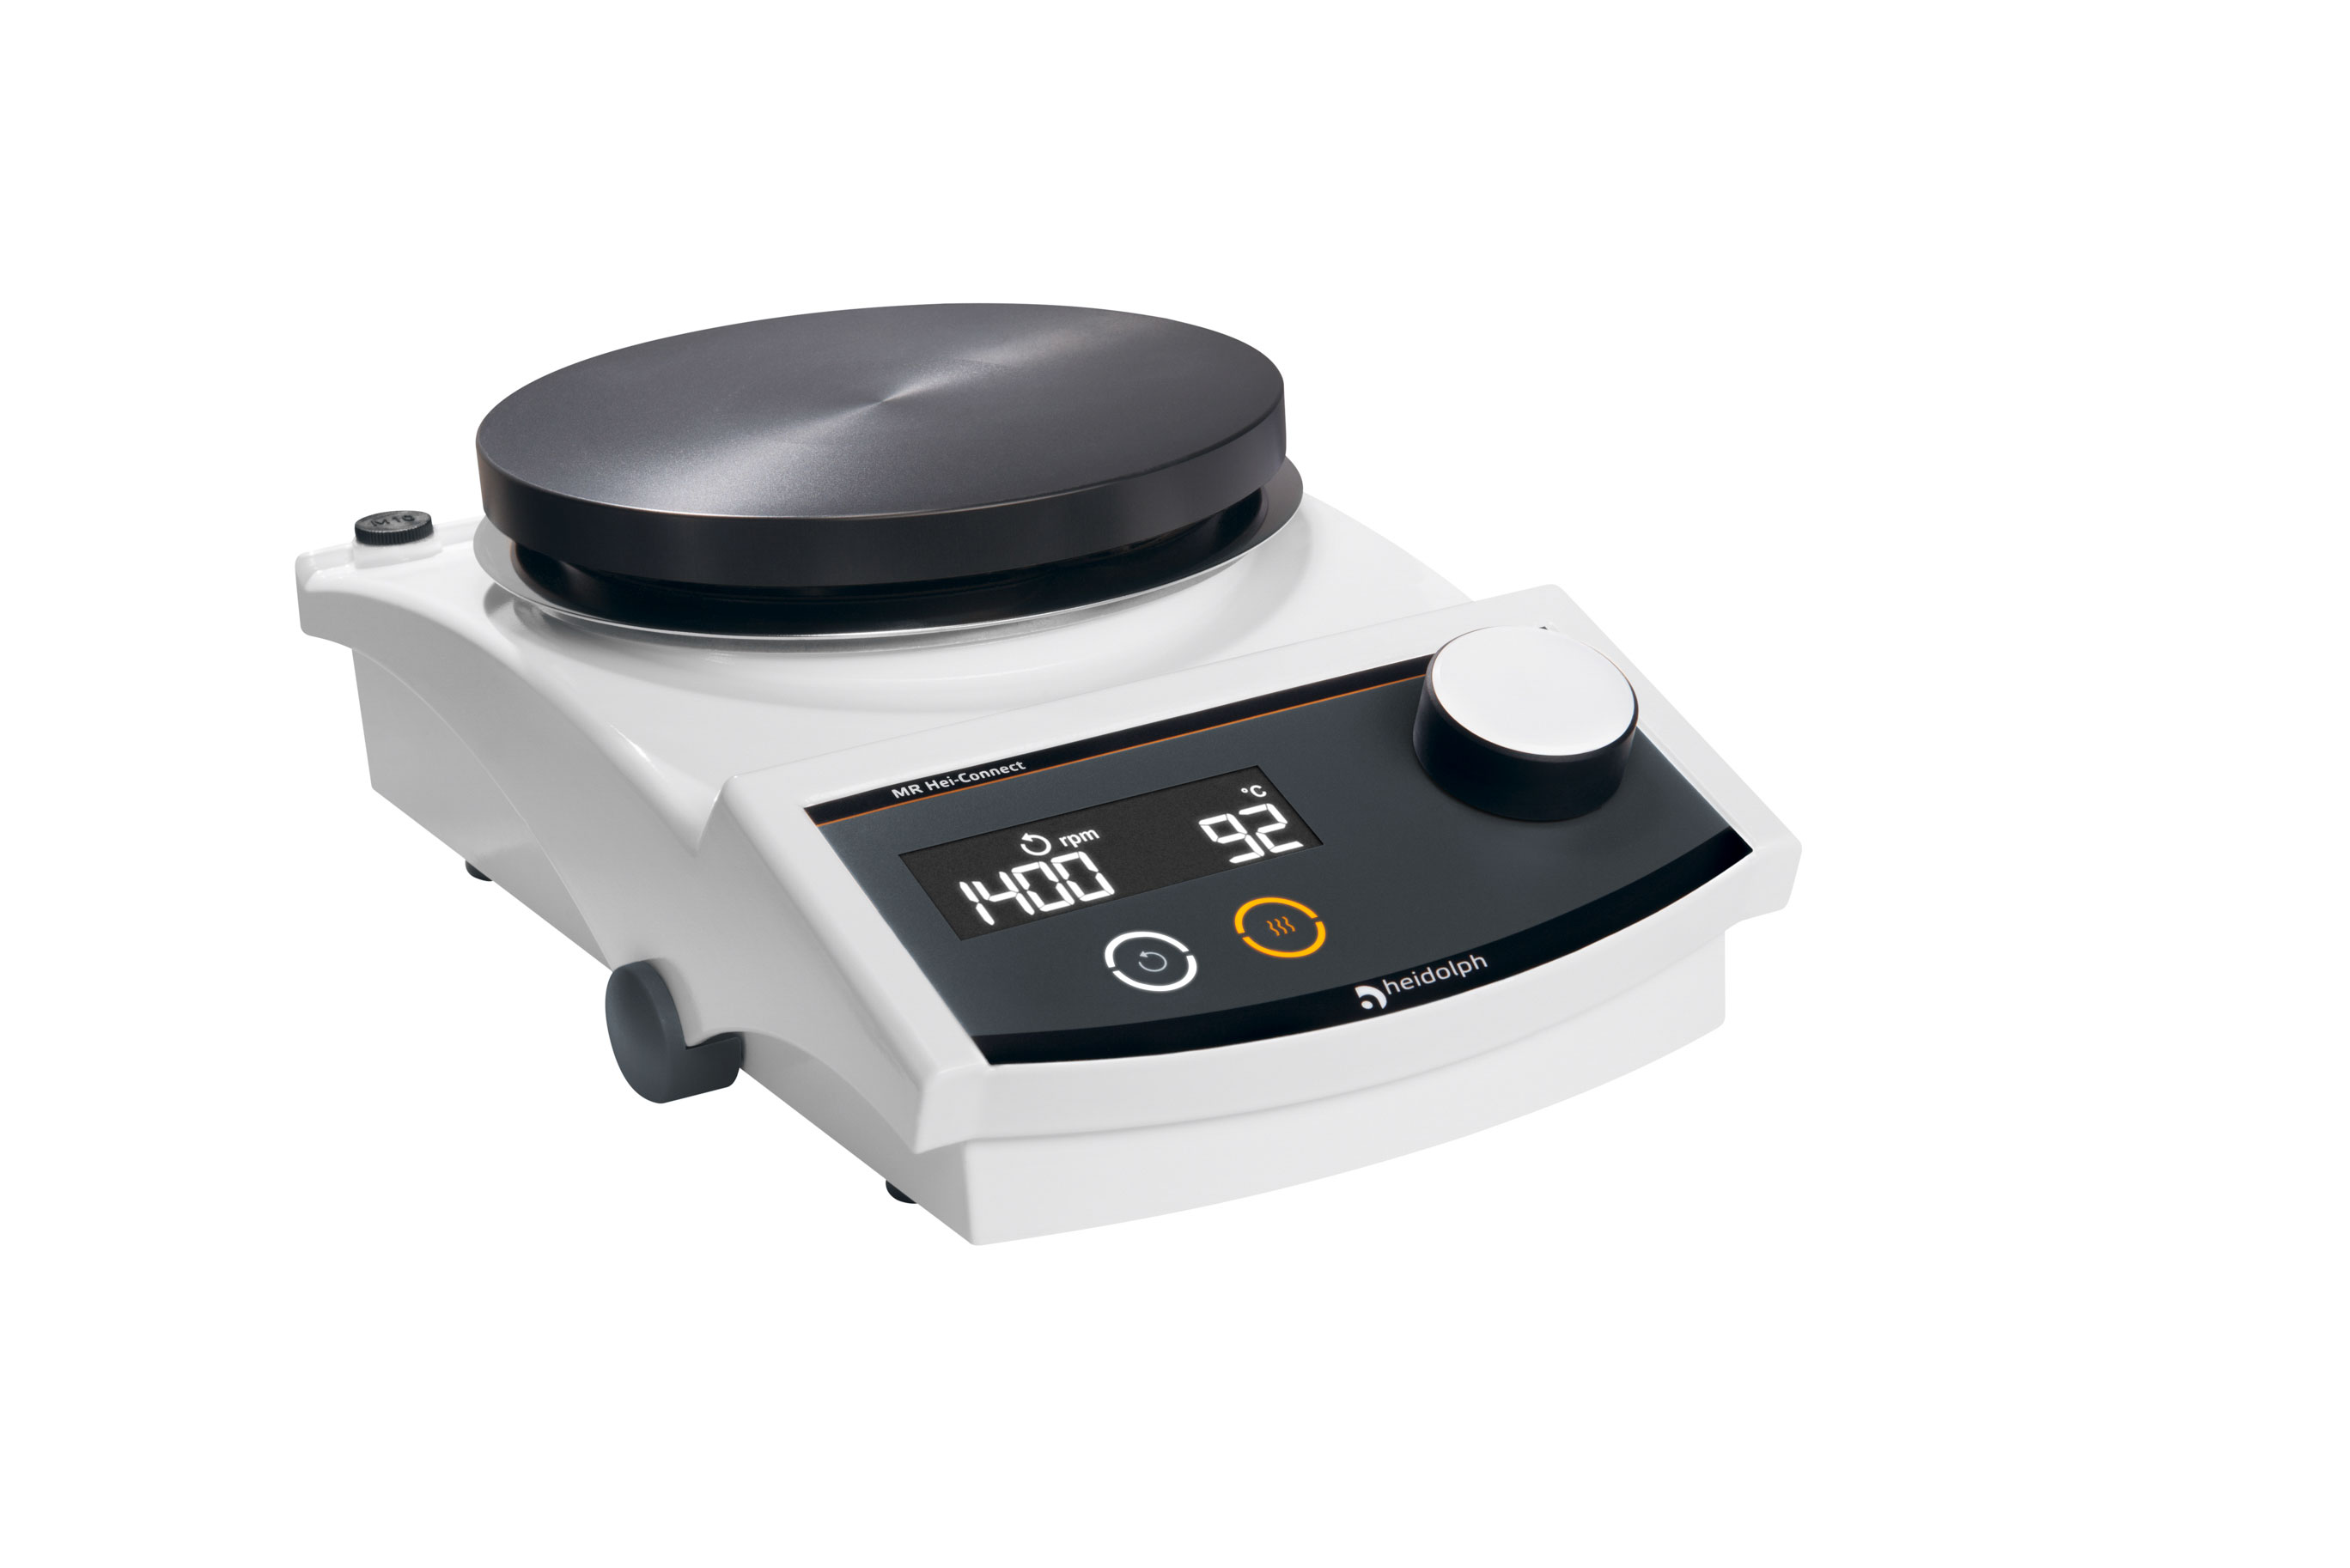 Magnetic stirrers with heating Hei-PLATE Mix'n'Heat Core/ Hei-PLATE Mix'n'Heat Core+ /Hei-Connect /Hei-PLATE MIX'N'HEAT Expert